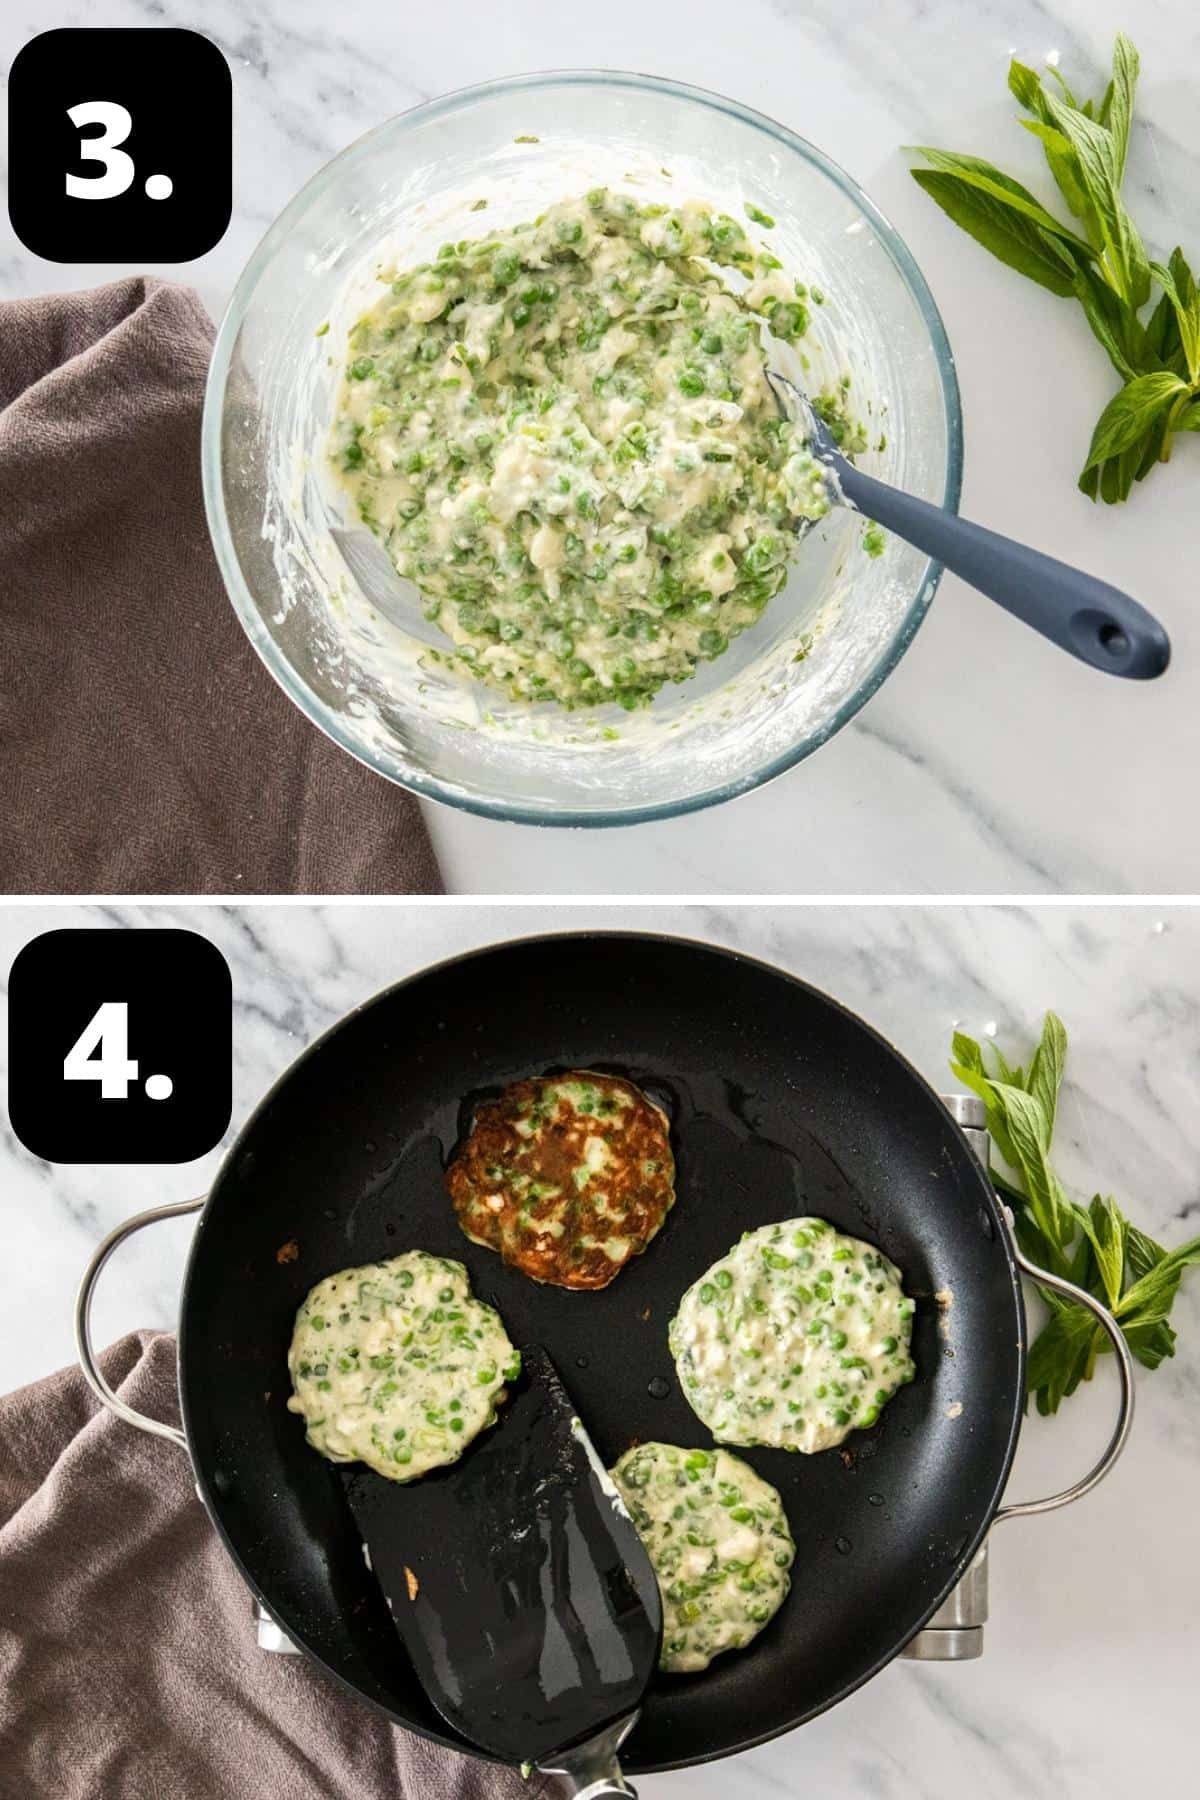 Steps 3-4 of preparing this recipe - combining the peas and batter and frying the fritters.